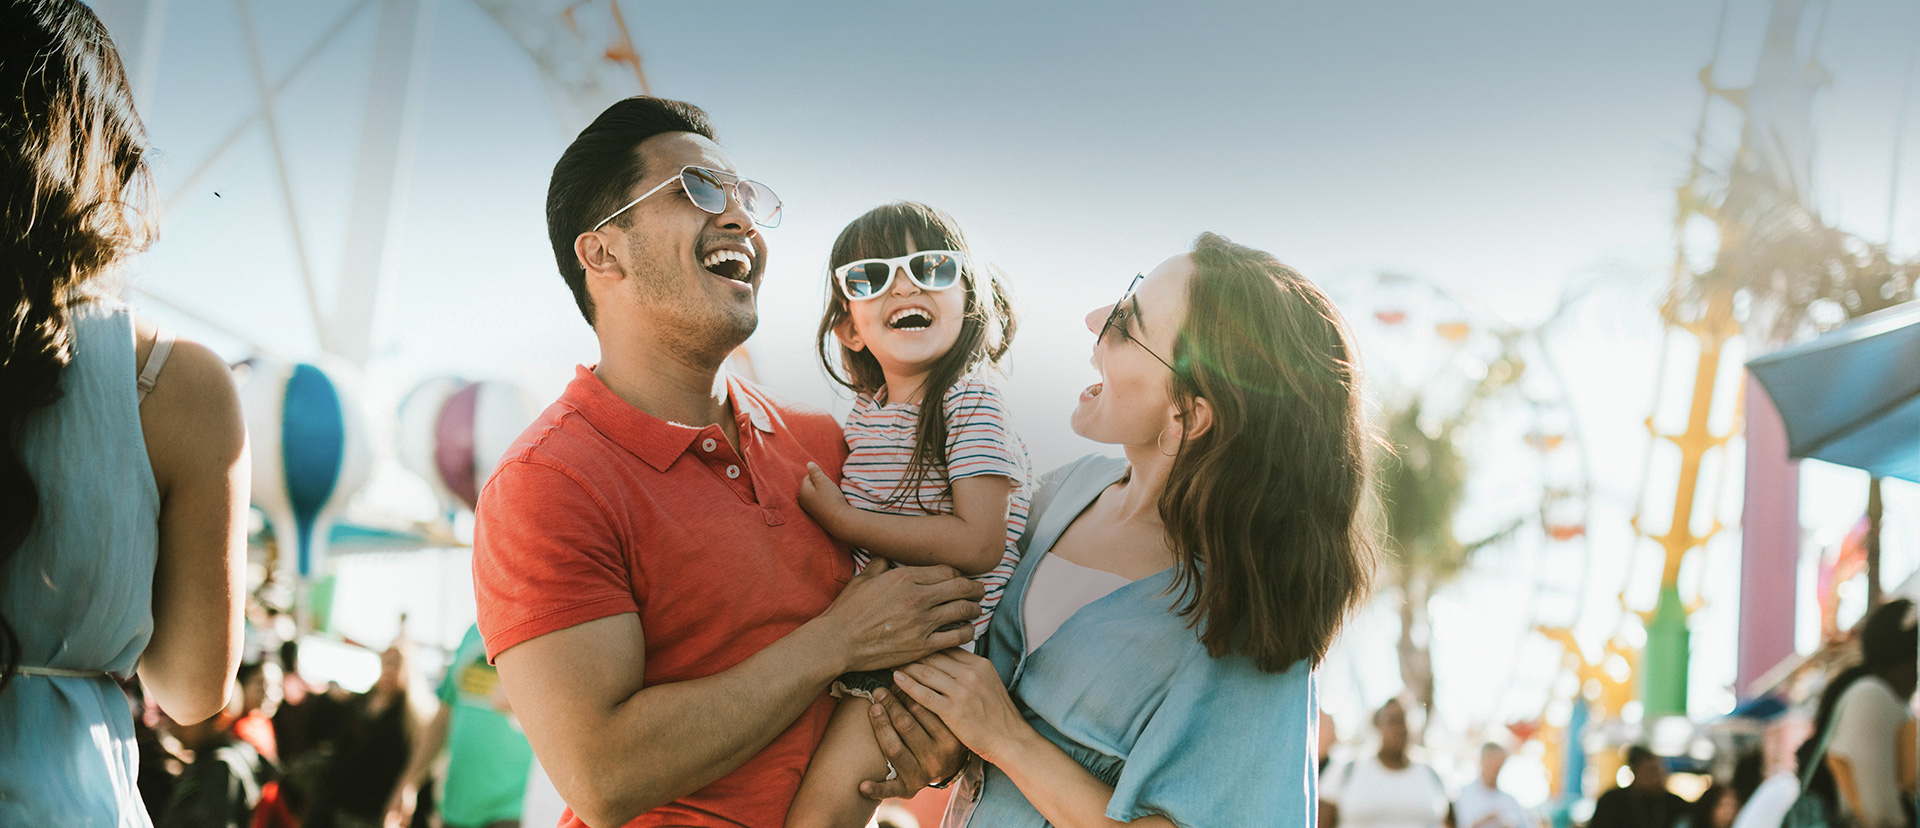 family with sunglasses smiling in an amusement park